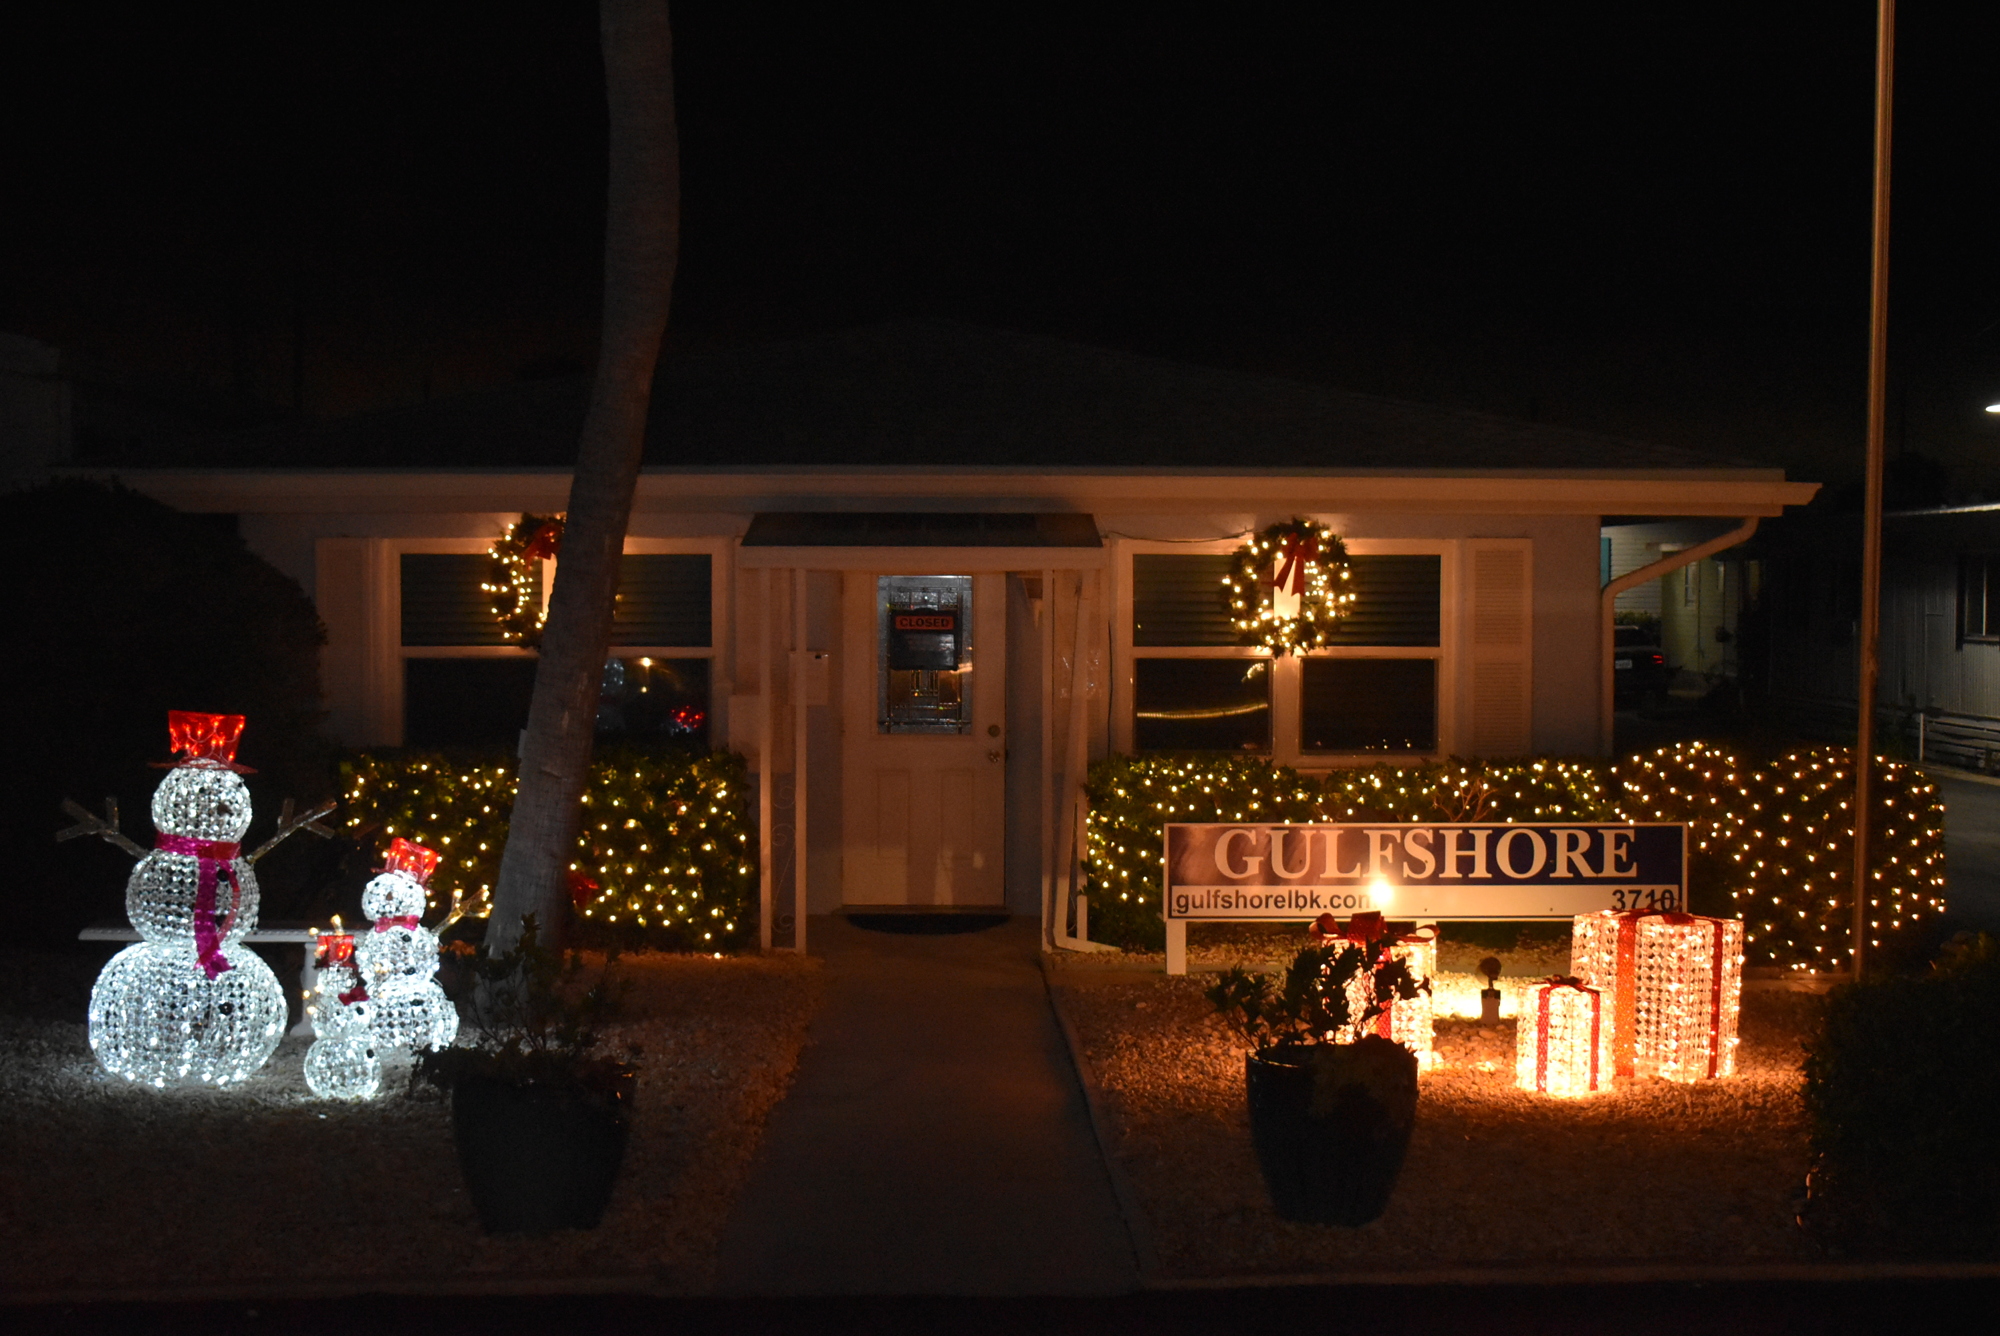 The Gulfshore office is merry and bright.